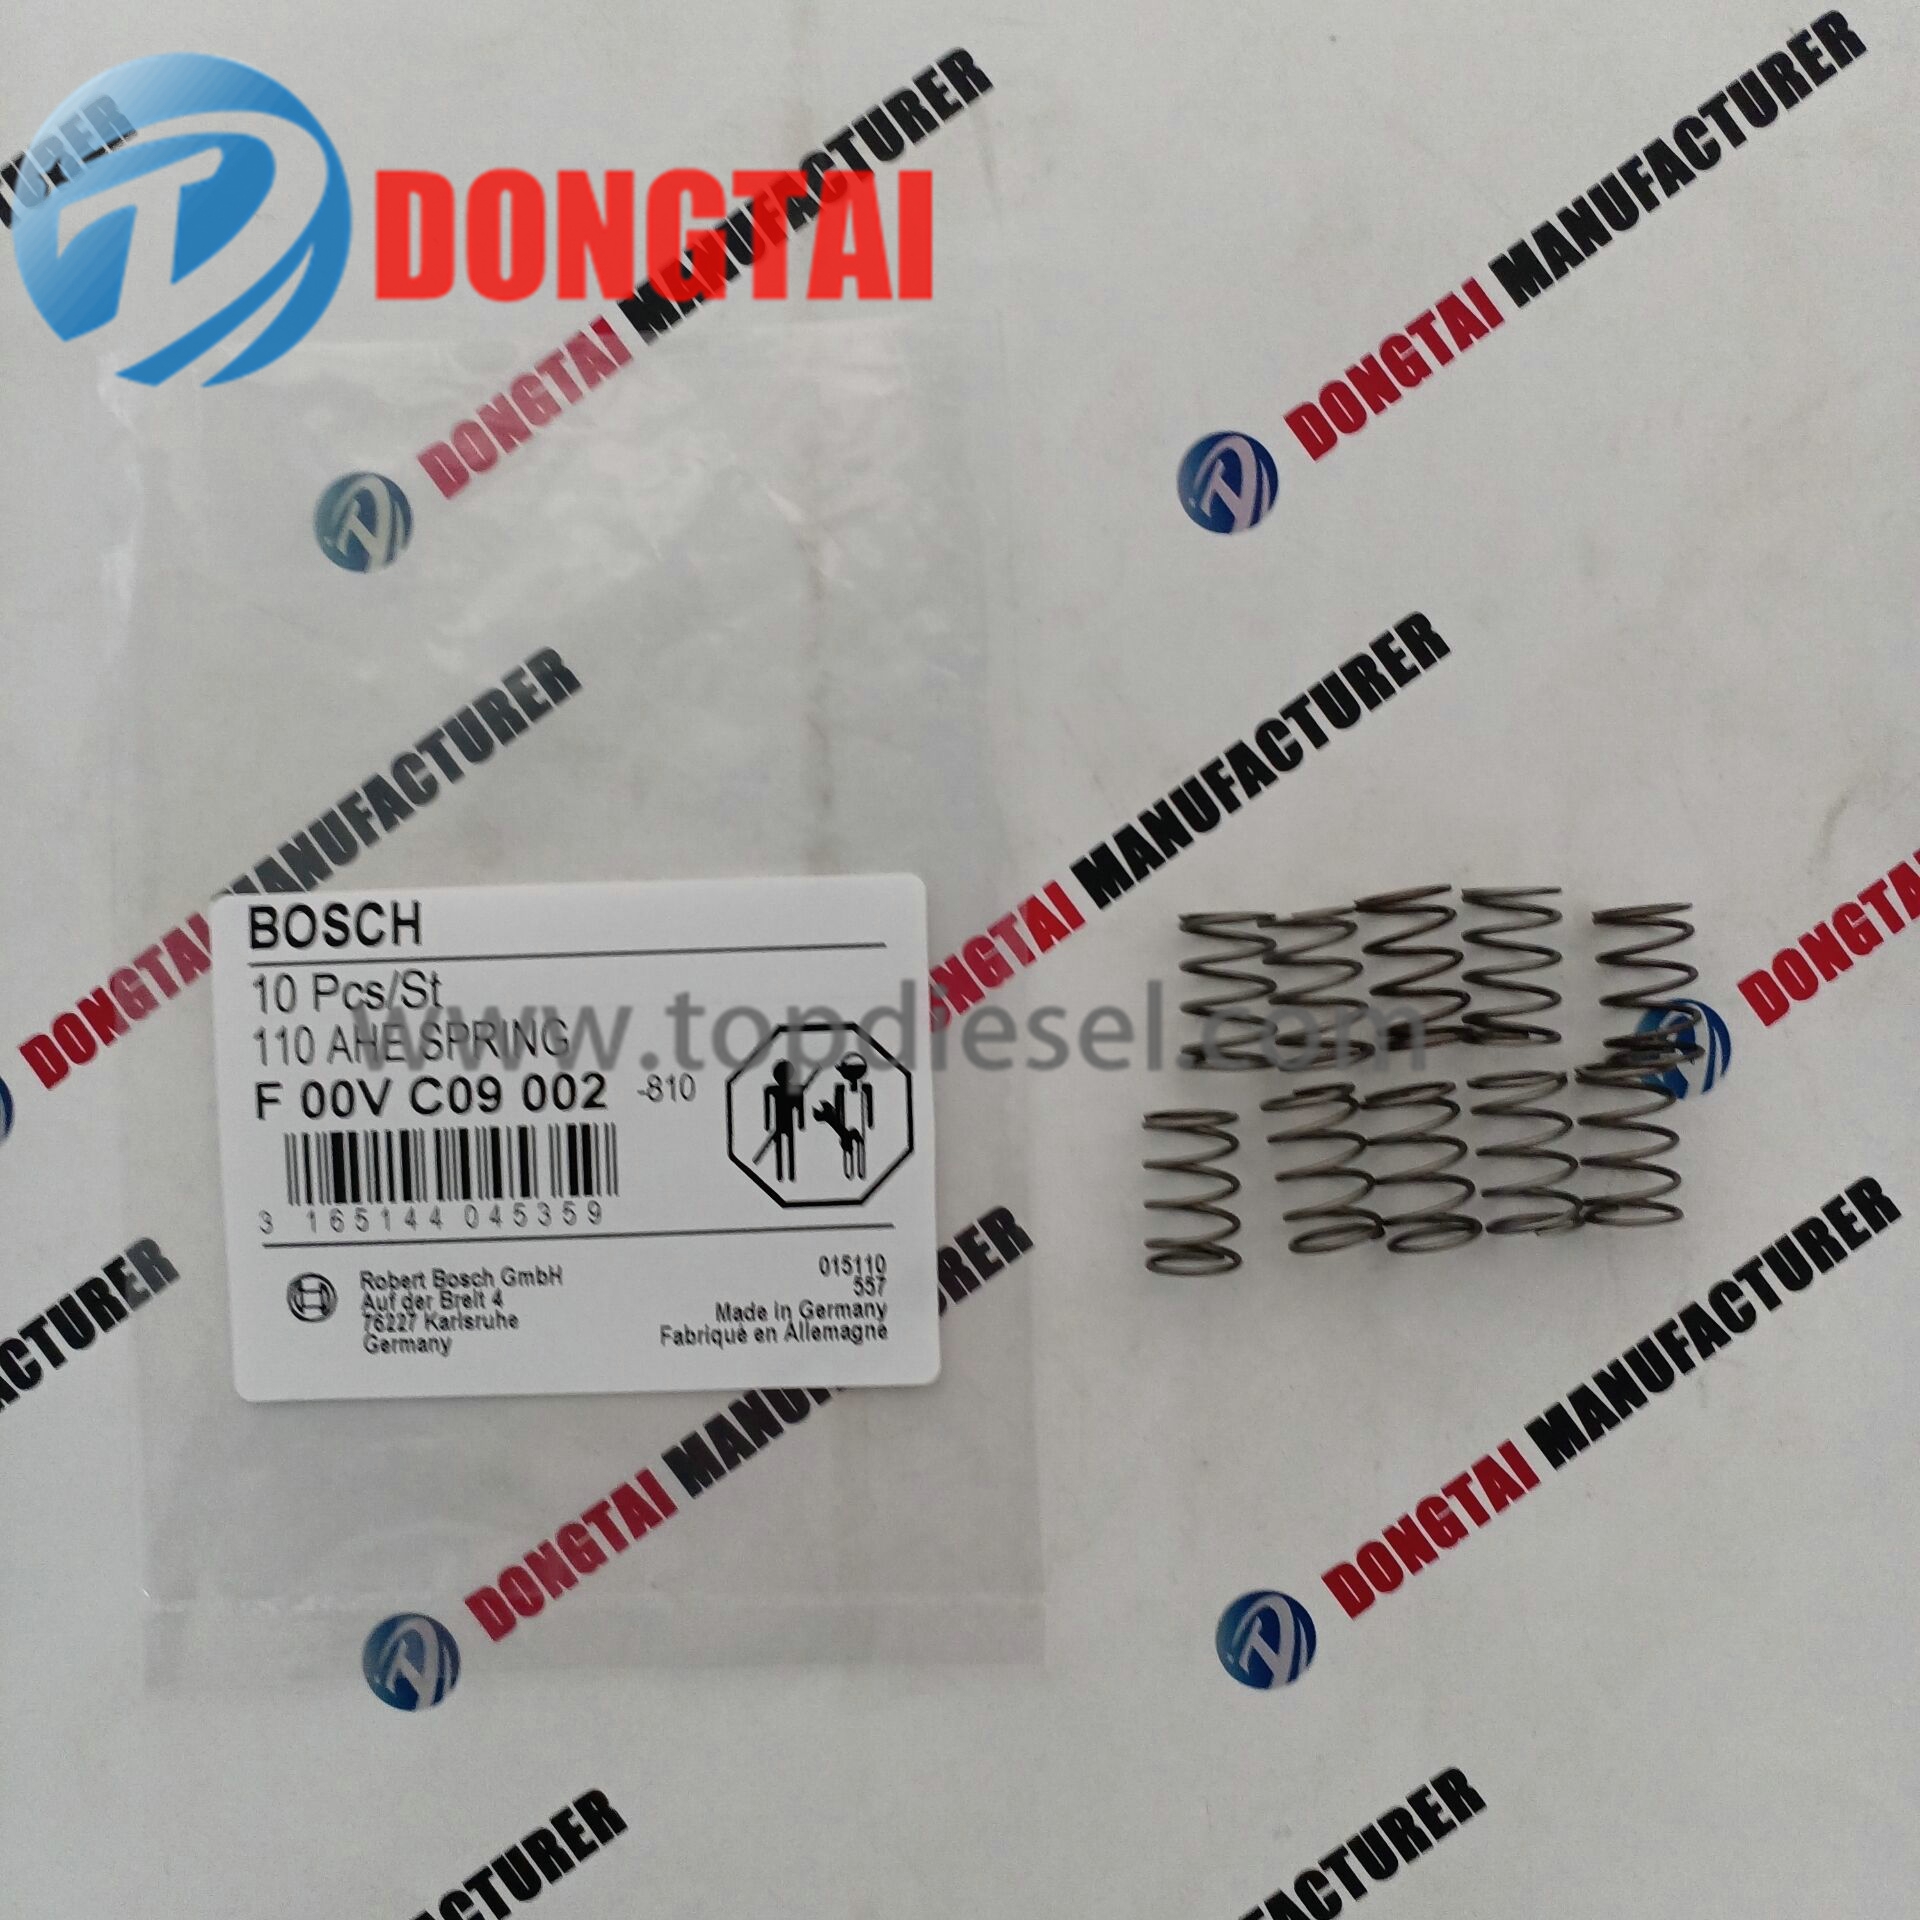 Manufactur standard Bosch Nozzle - NO.587(5）F 00V C09 002 AHE Spring for BOSCH 110 Series injector – Dongtai